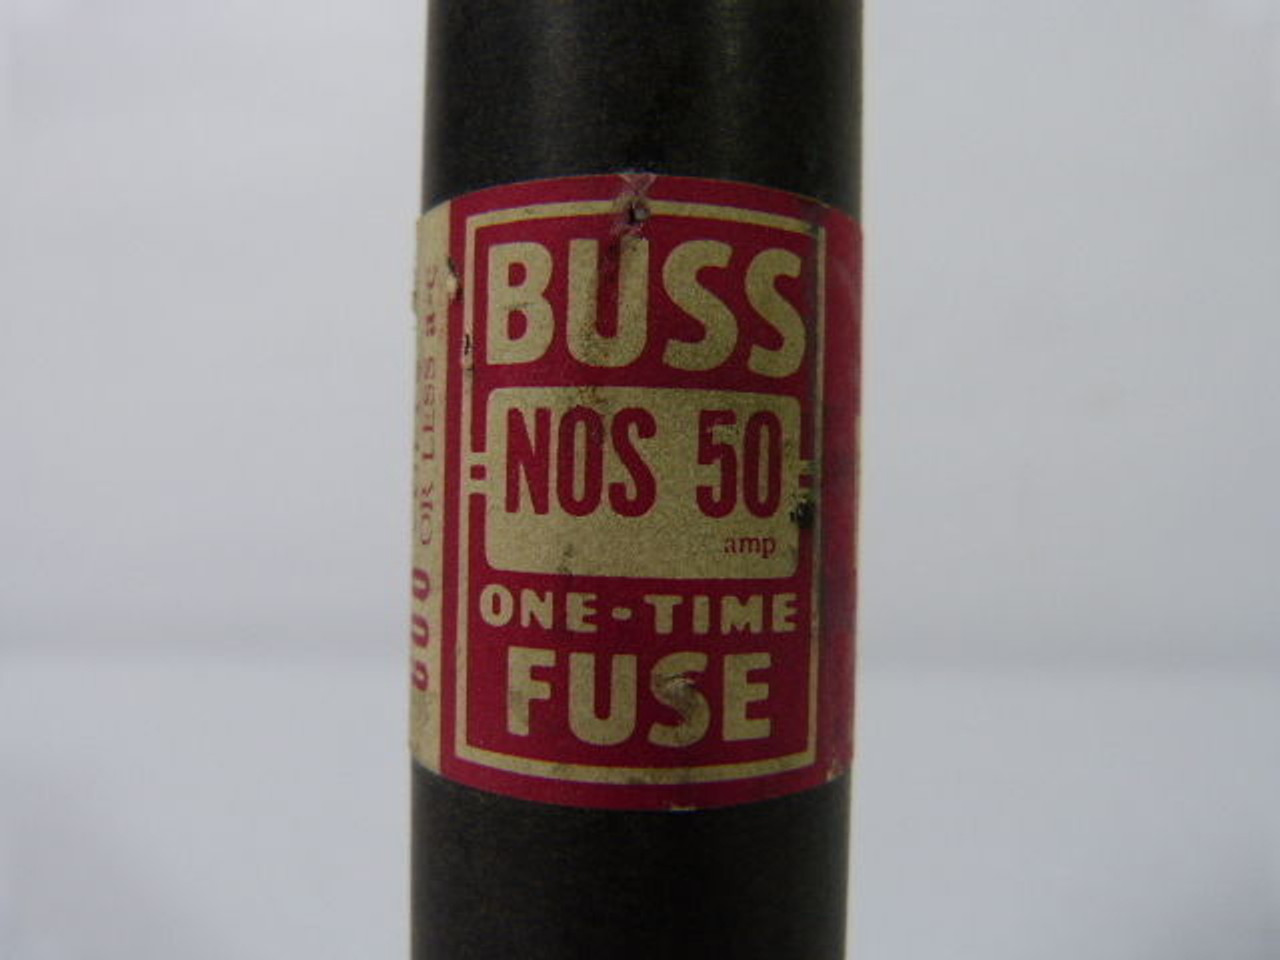 Bussmann NOS-50 One Time Fuse 50A 600V USED